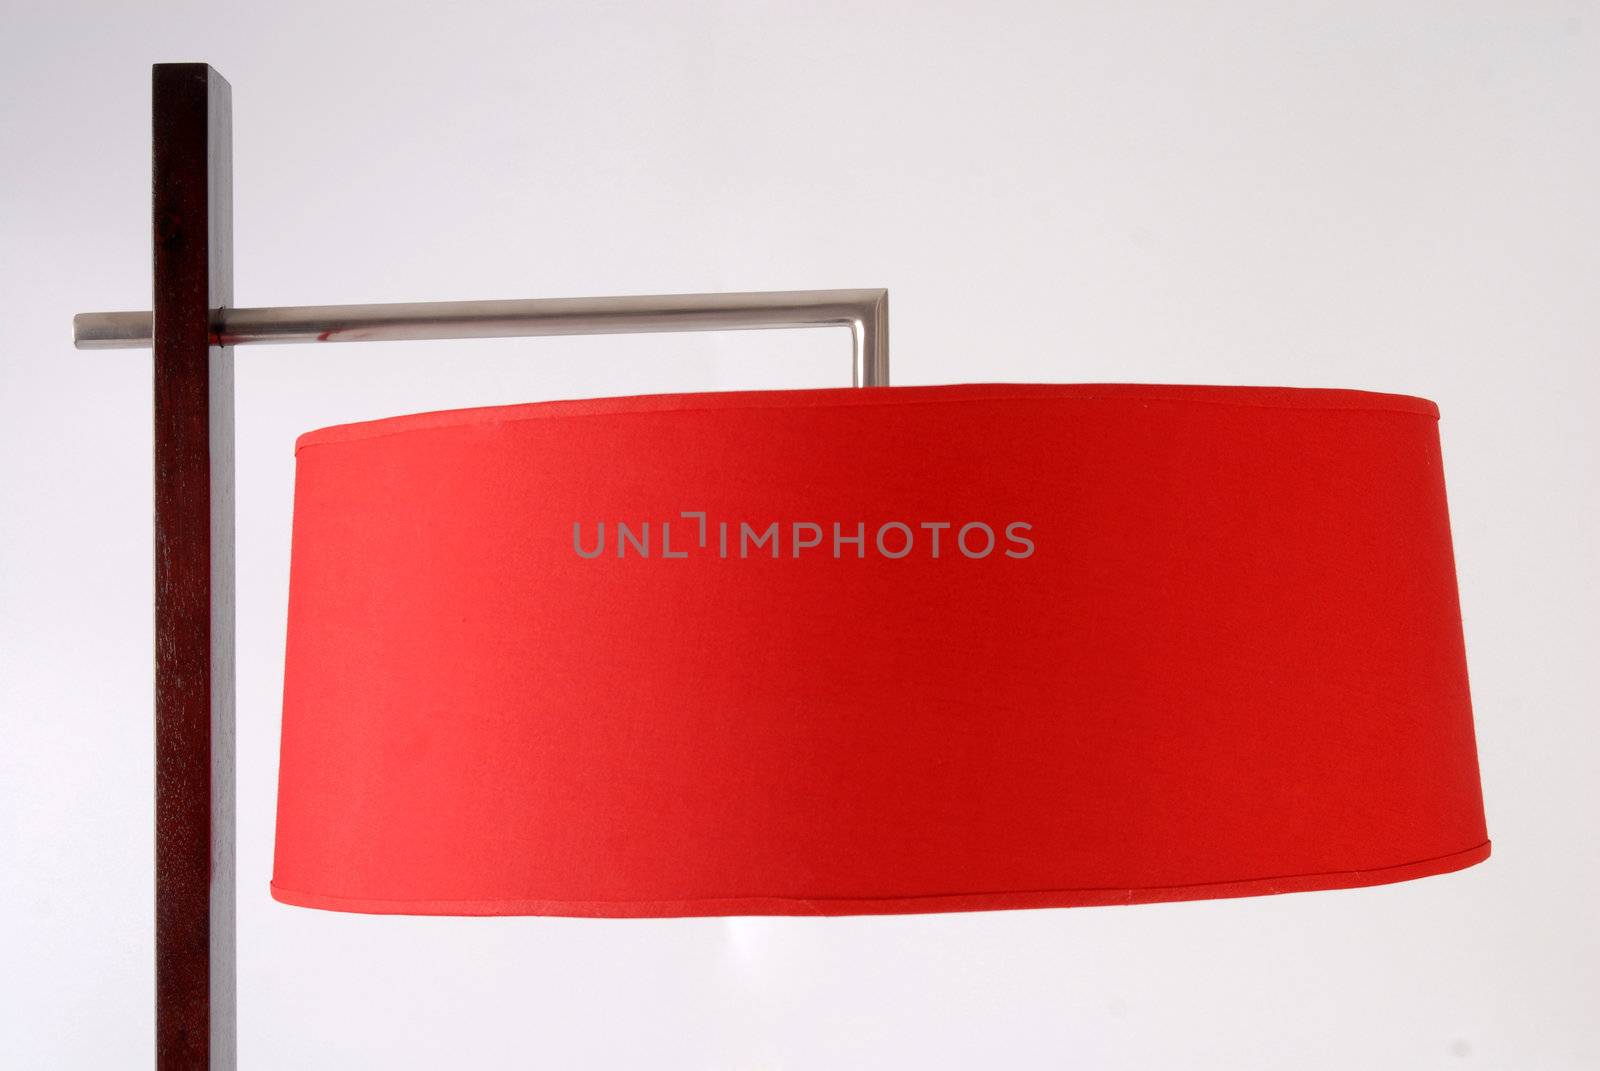 Metallic and wooden contemporary floor lamp detail. Red lampshade. Isolated on white background